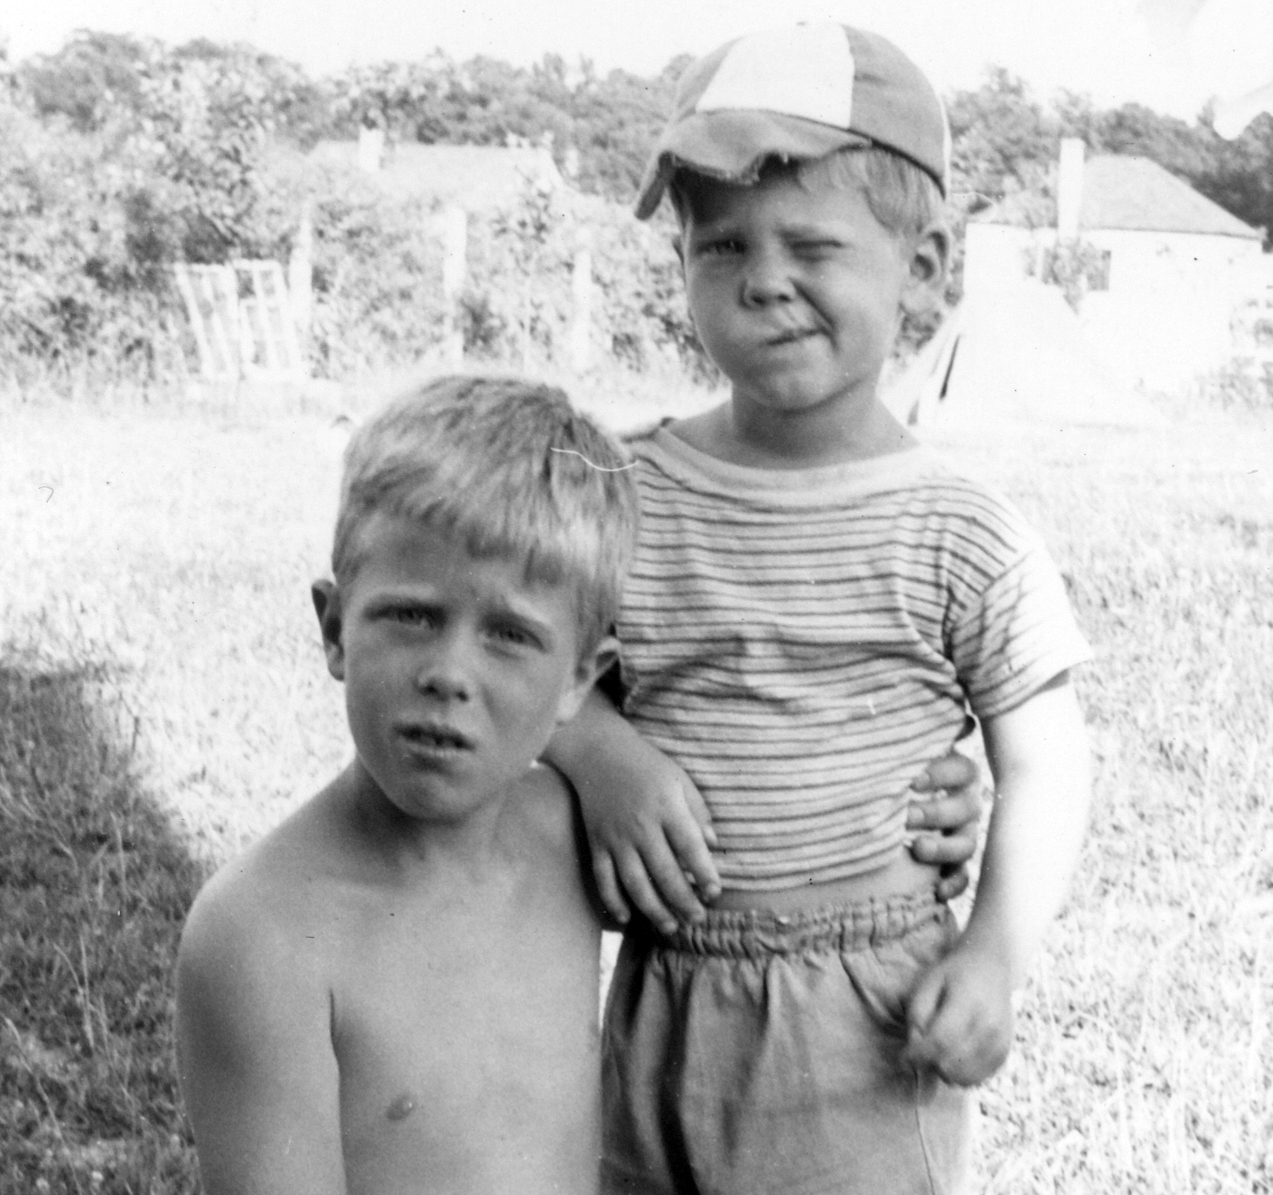 Me and Dennis 1954